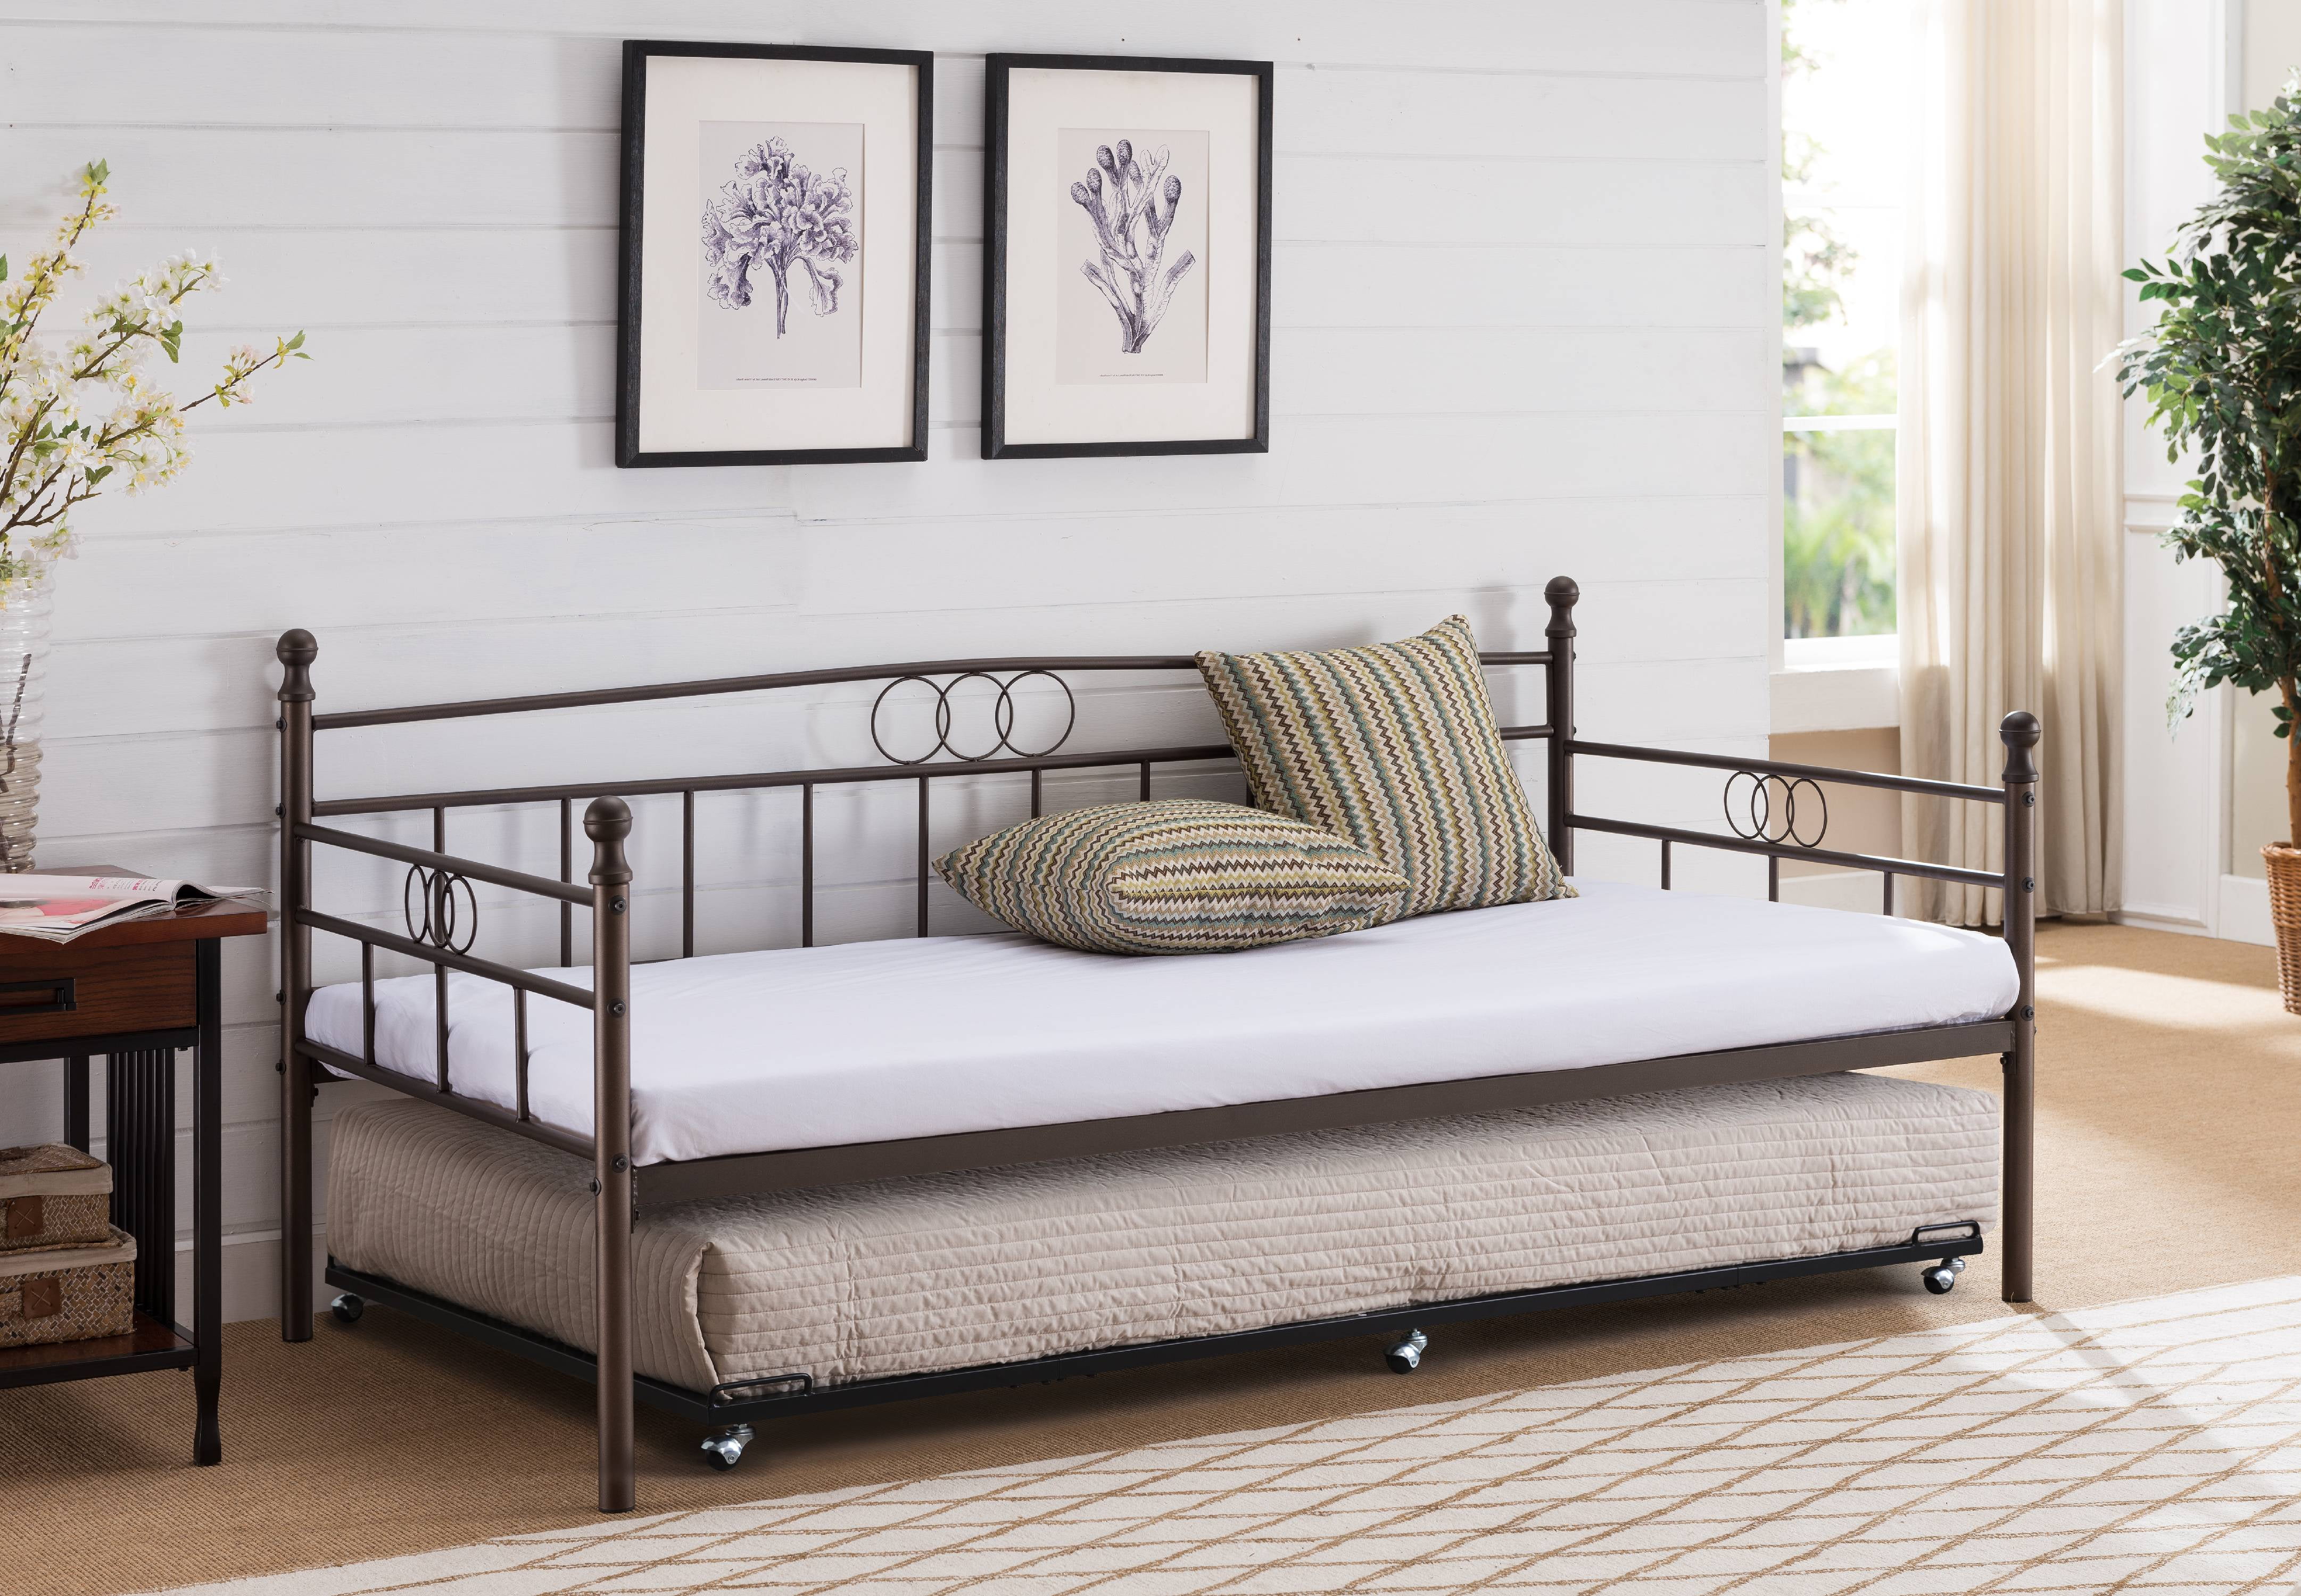 the metal twin rails to hold mattress